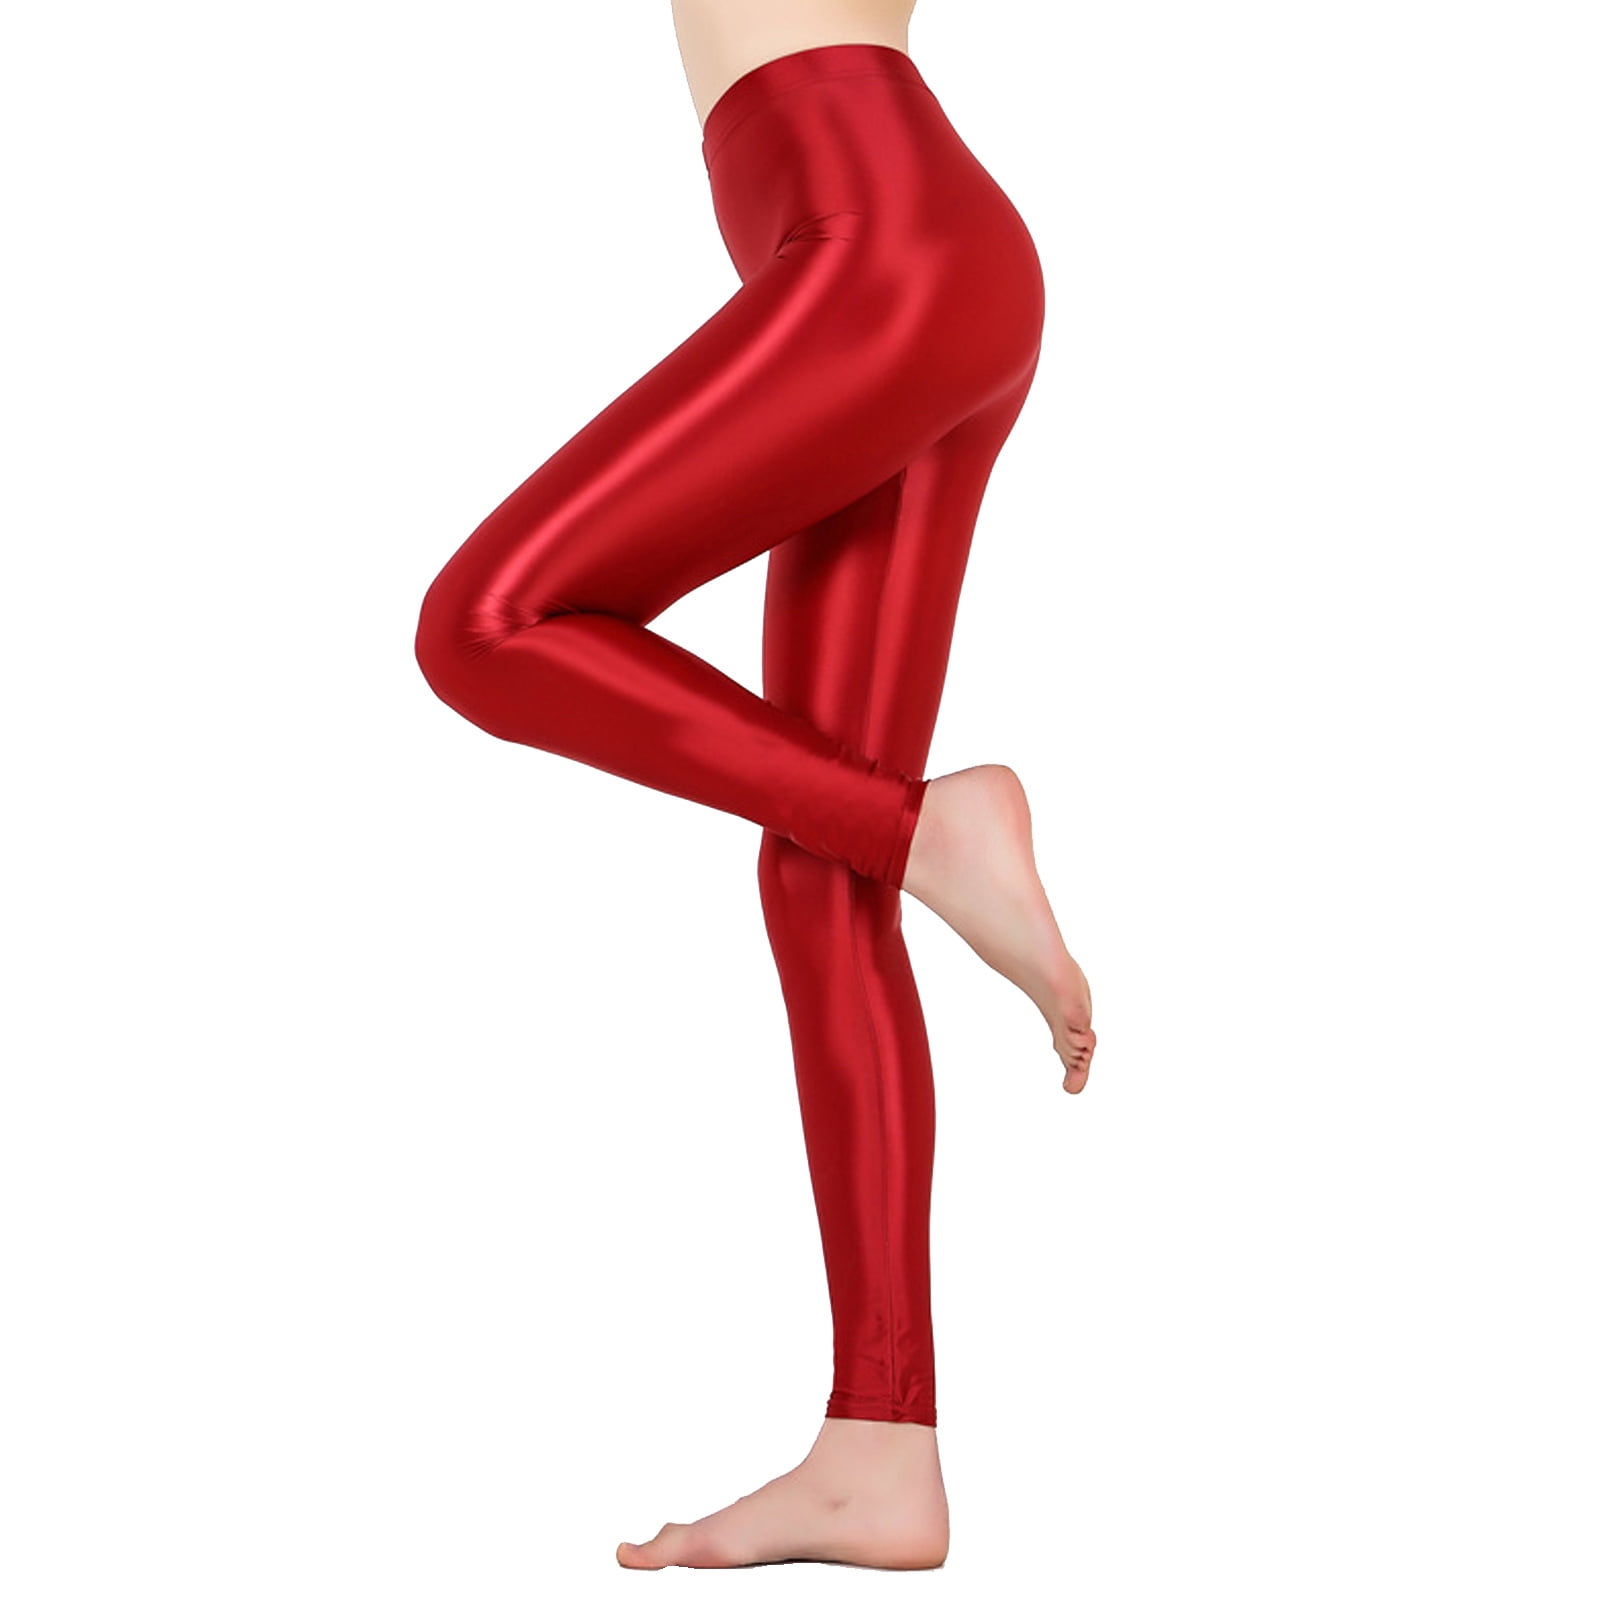 CHICTRY Womens Shiny Leggings Yoga Pants Glossy High Waist Tights Trousers  for Workout Fitness Club Dance Burgundy XL 